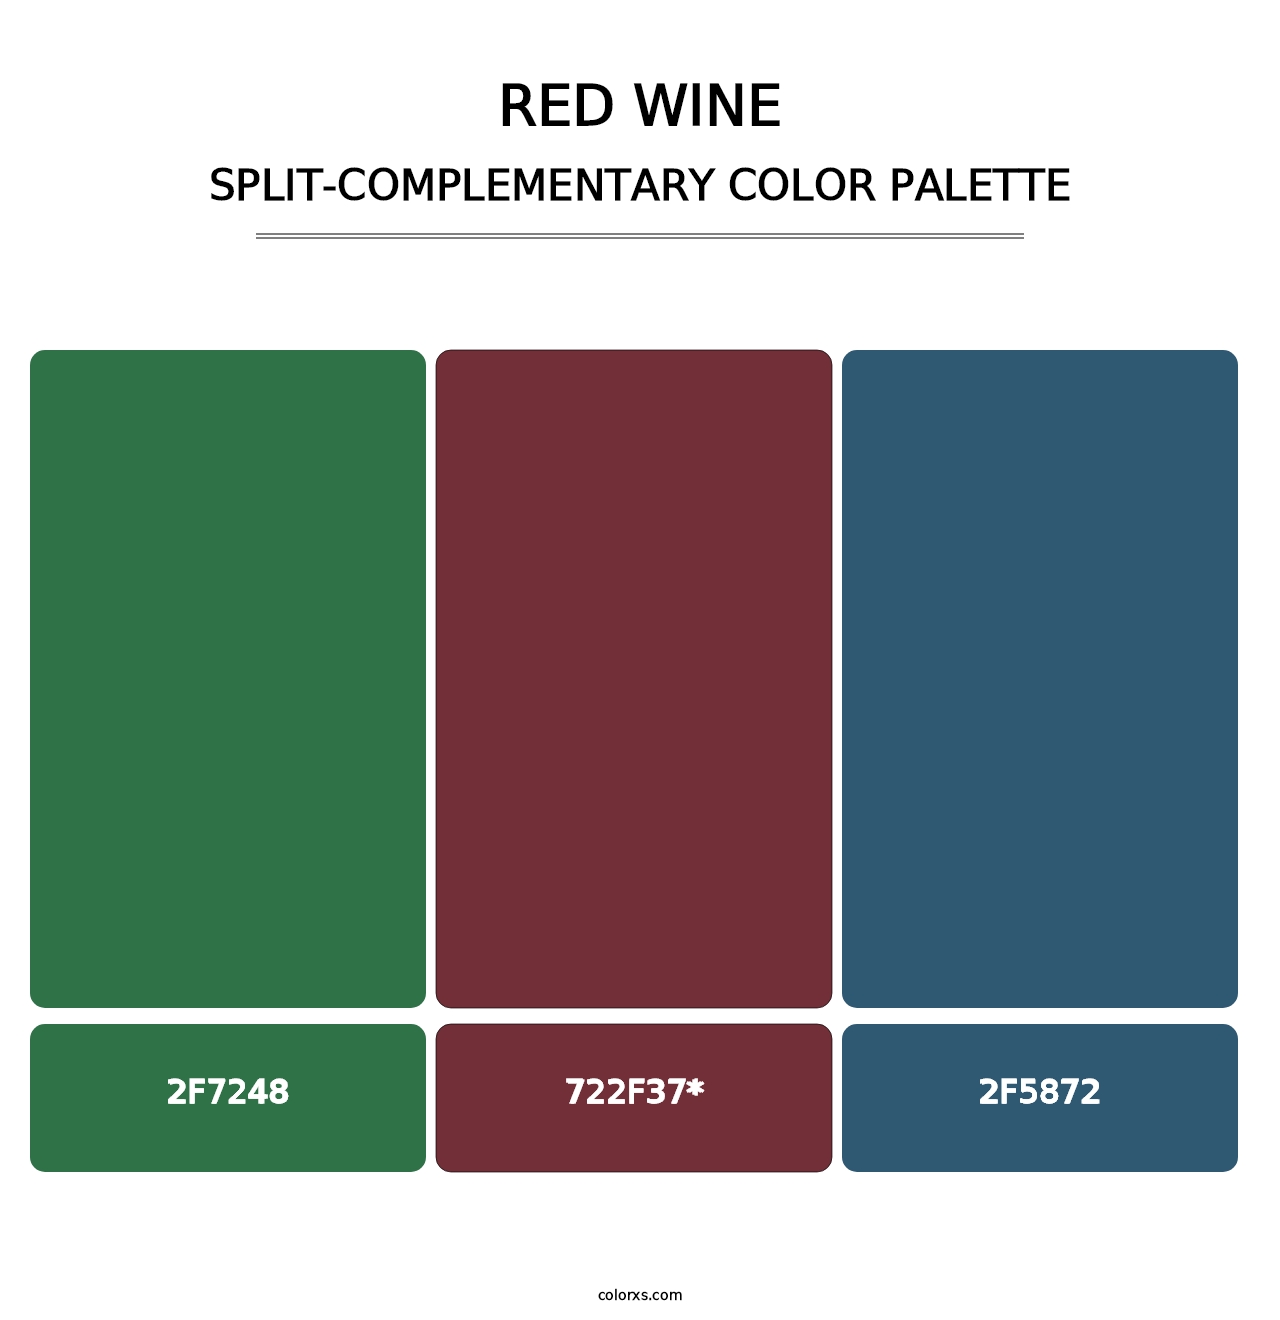 Red Wine - Split-Complementary Color Palette